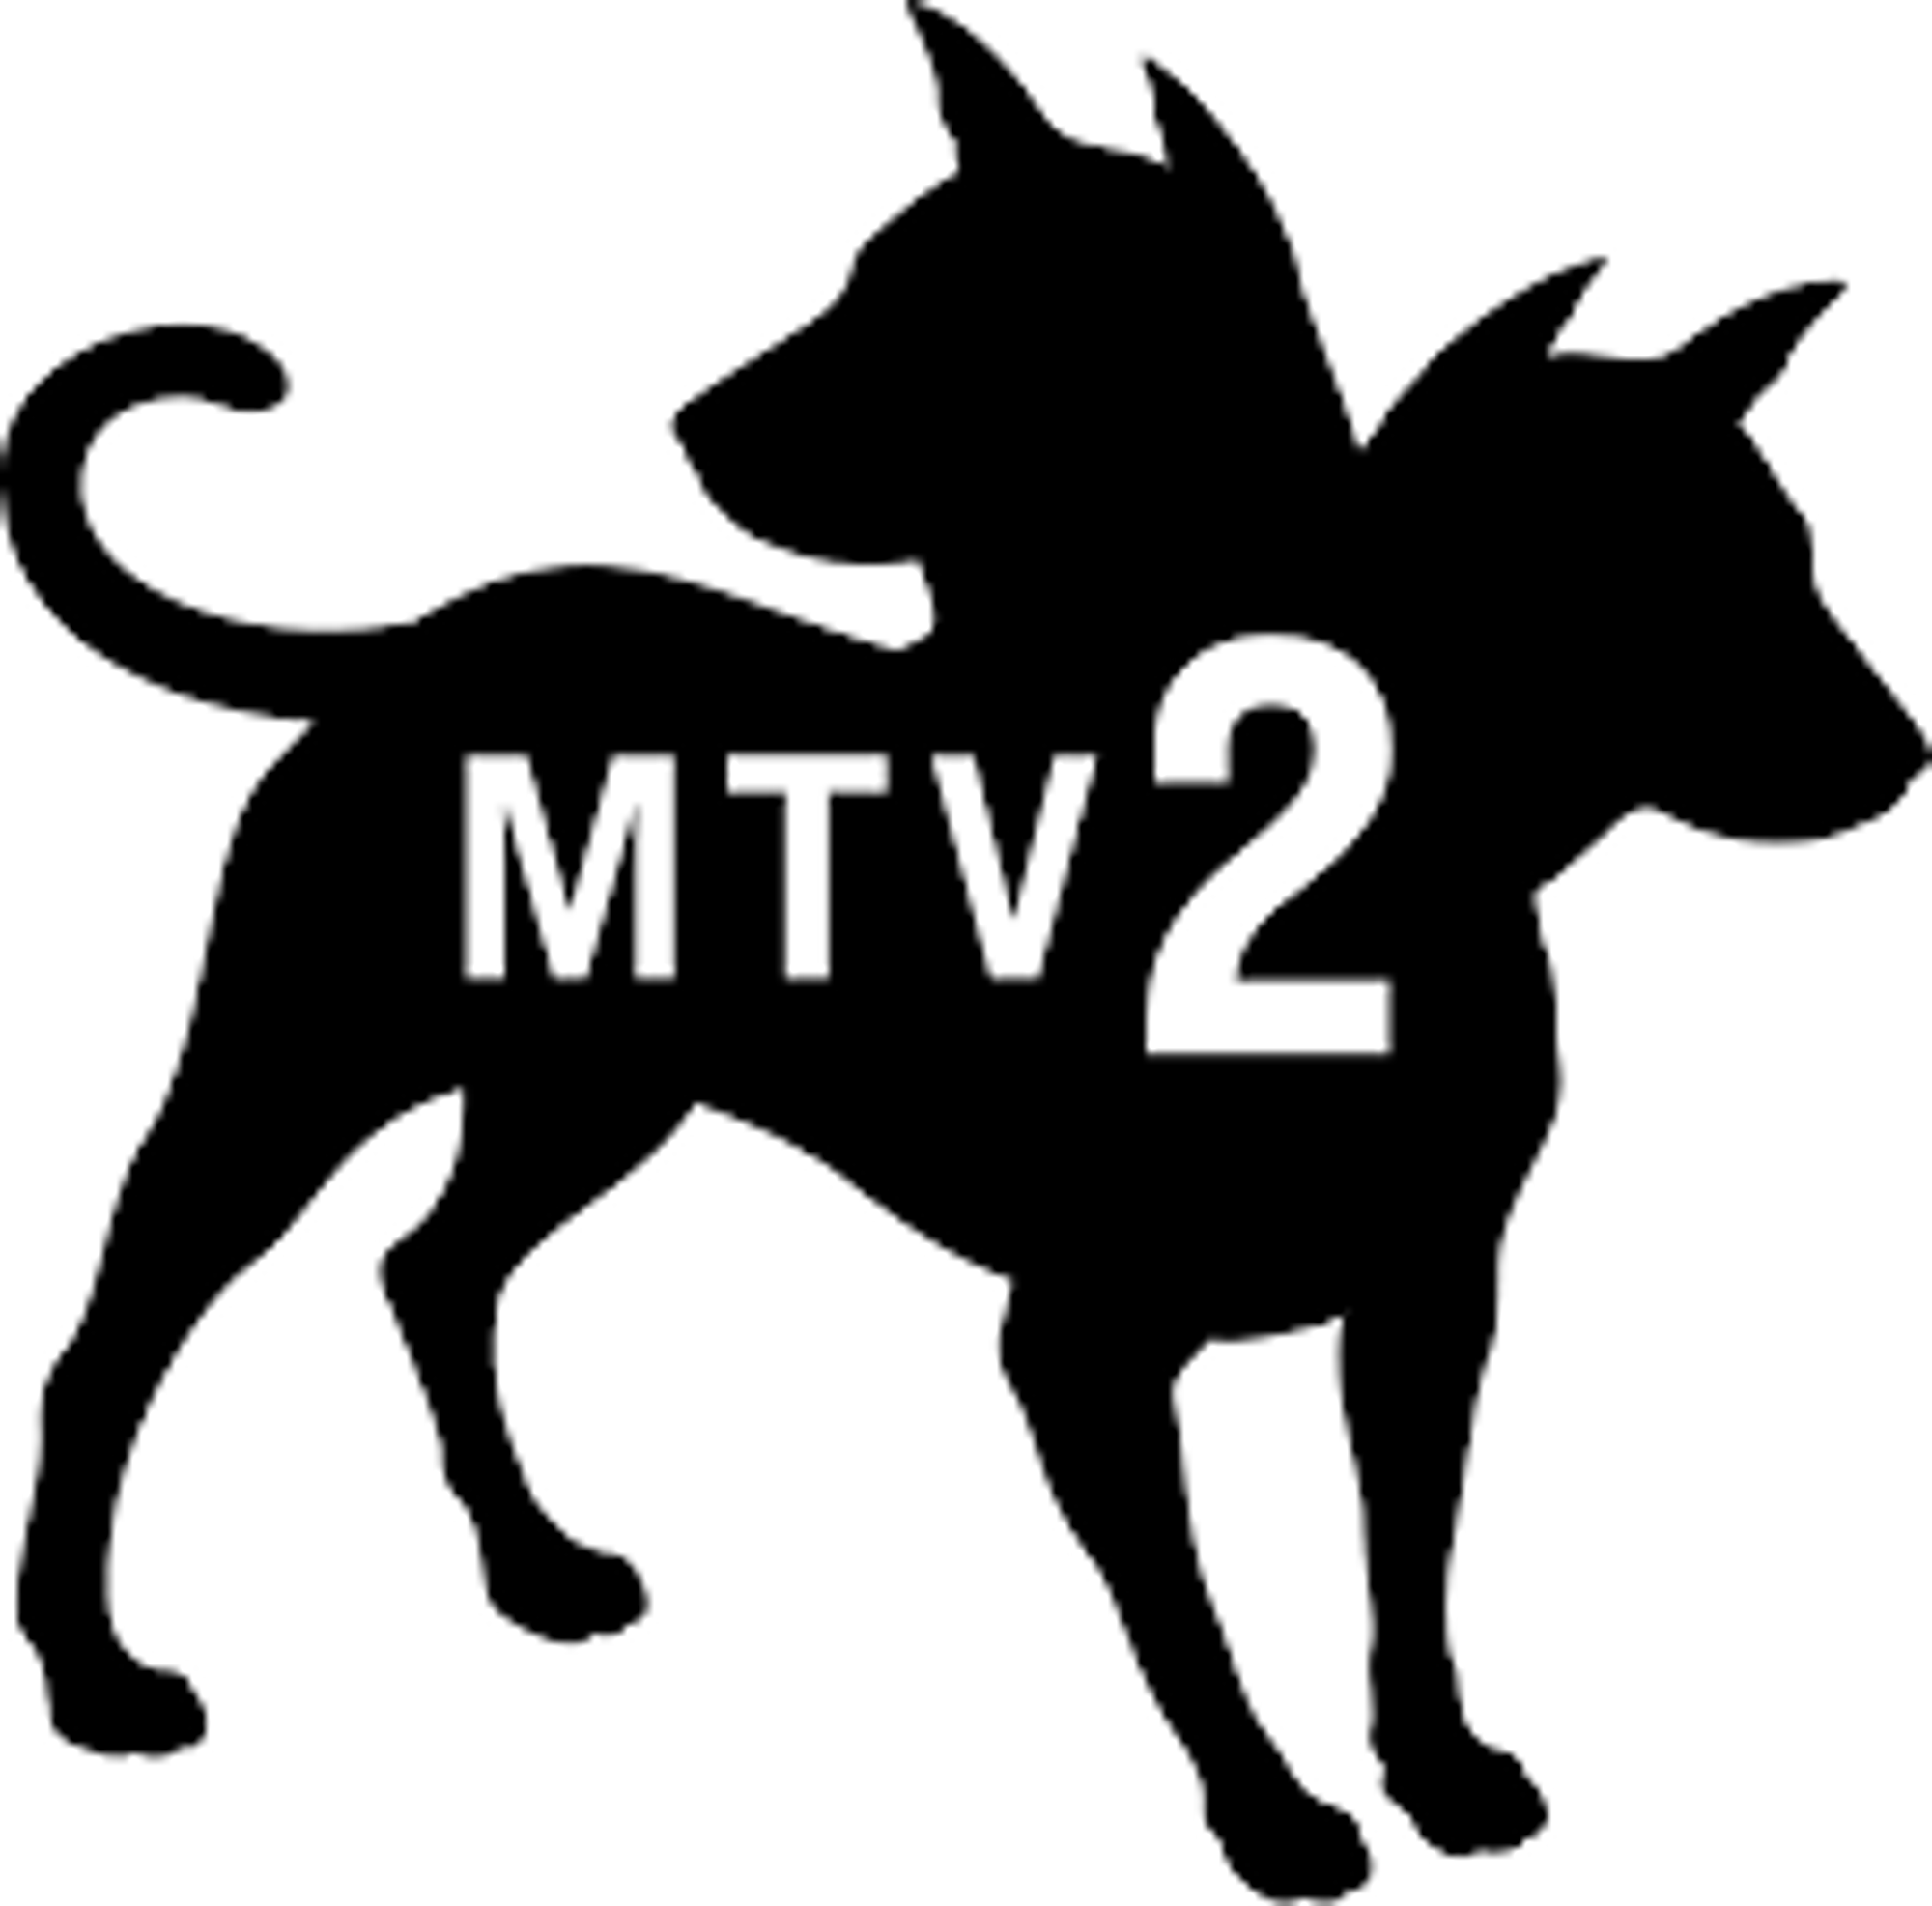 mtv2.png